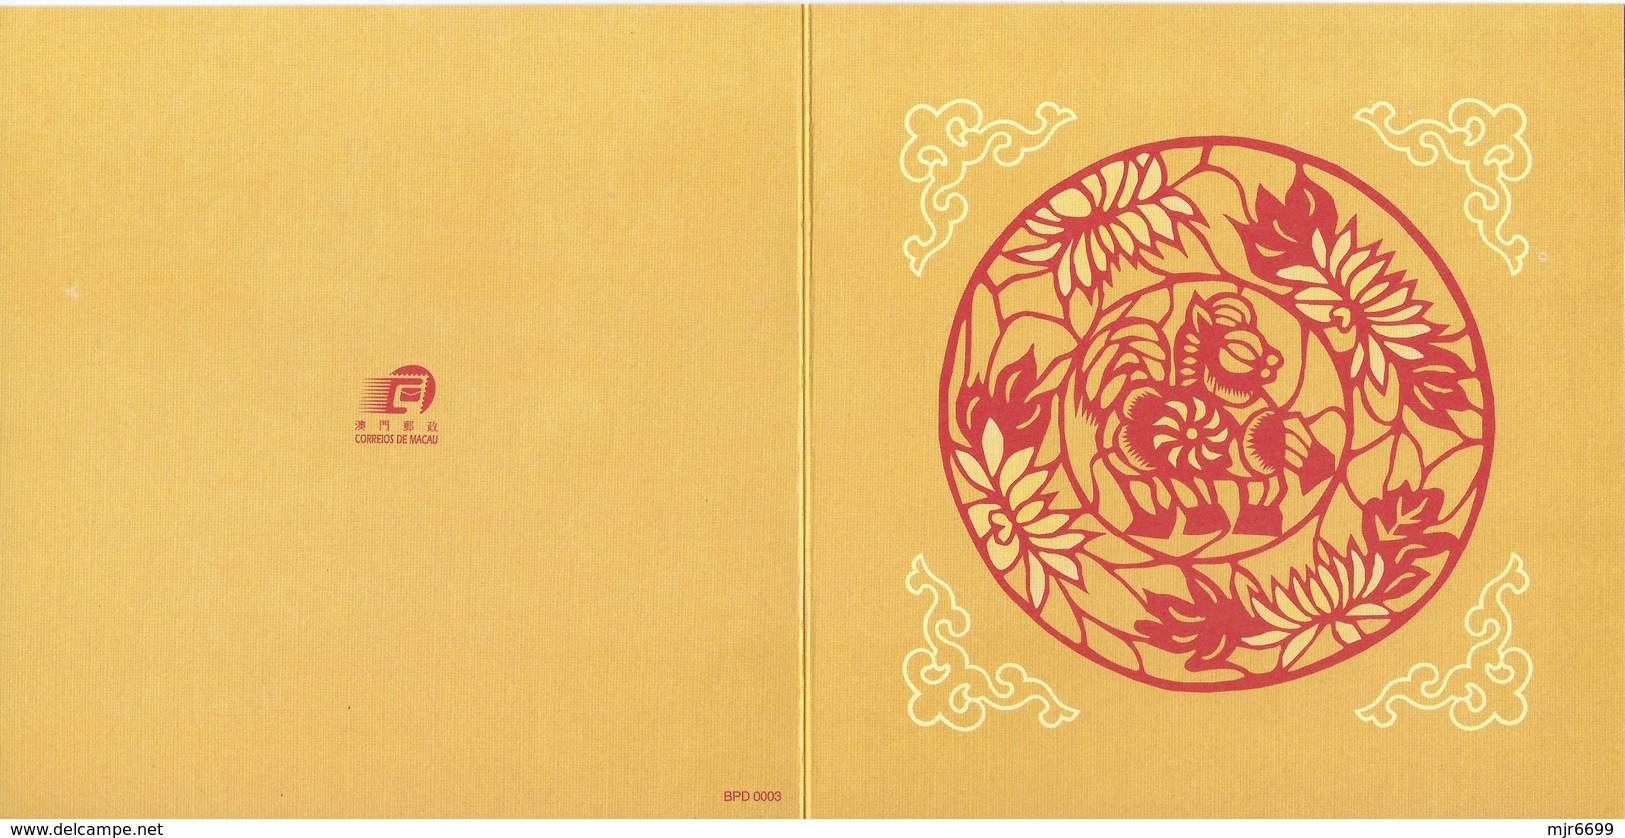 MACAU 2002 LUNAR NEW YEAR OF THE HORSE GREETING CARD & POSTAGE PAID COVER, LOCAL USAGE,  POST OFFICE CODE #BPD003 - Enteros Postales